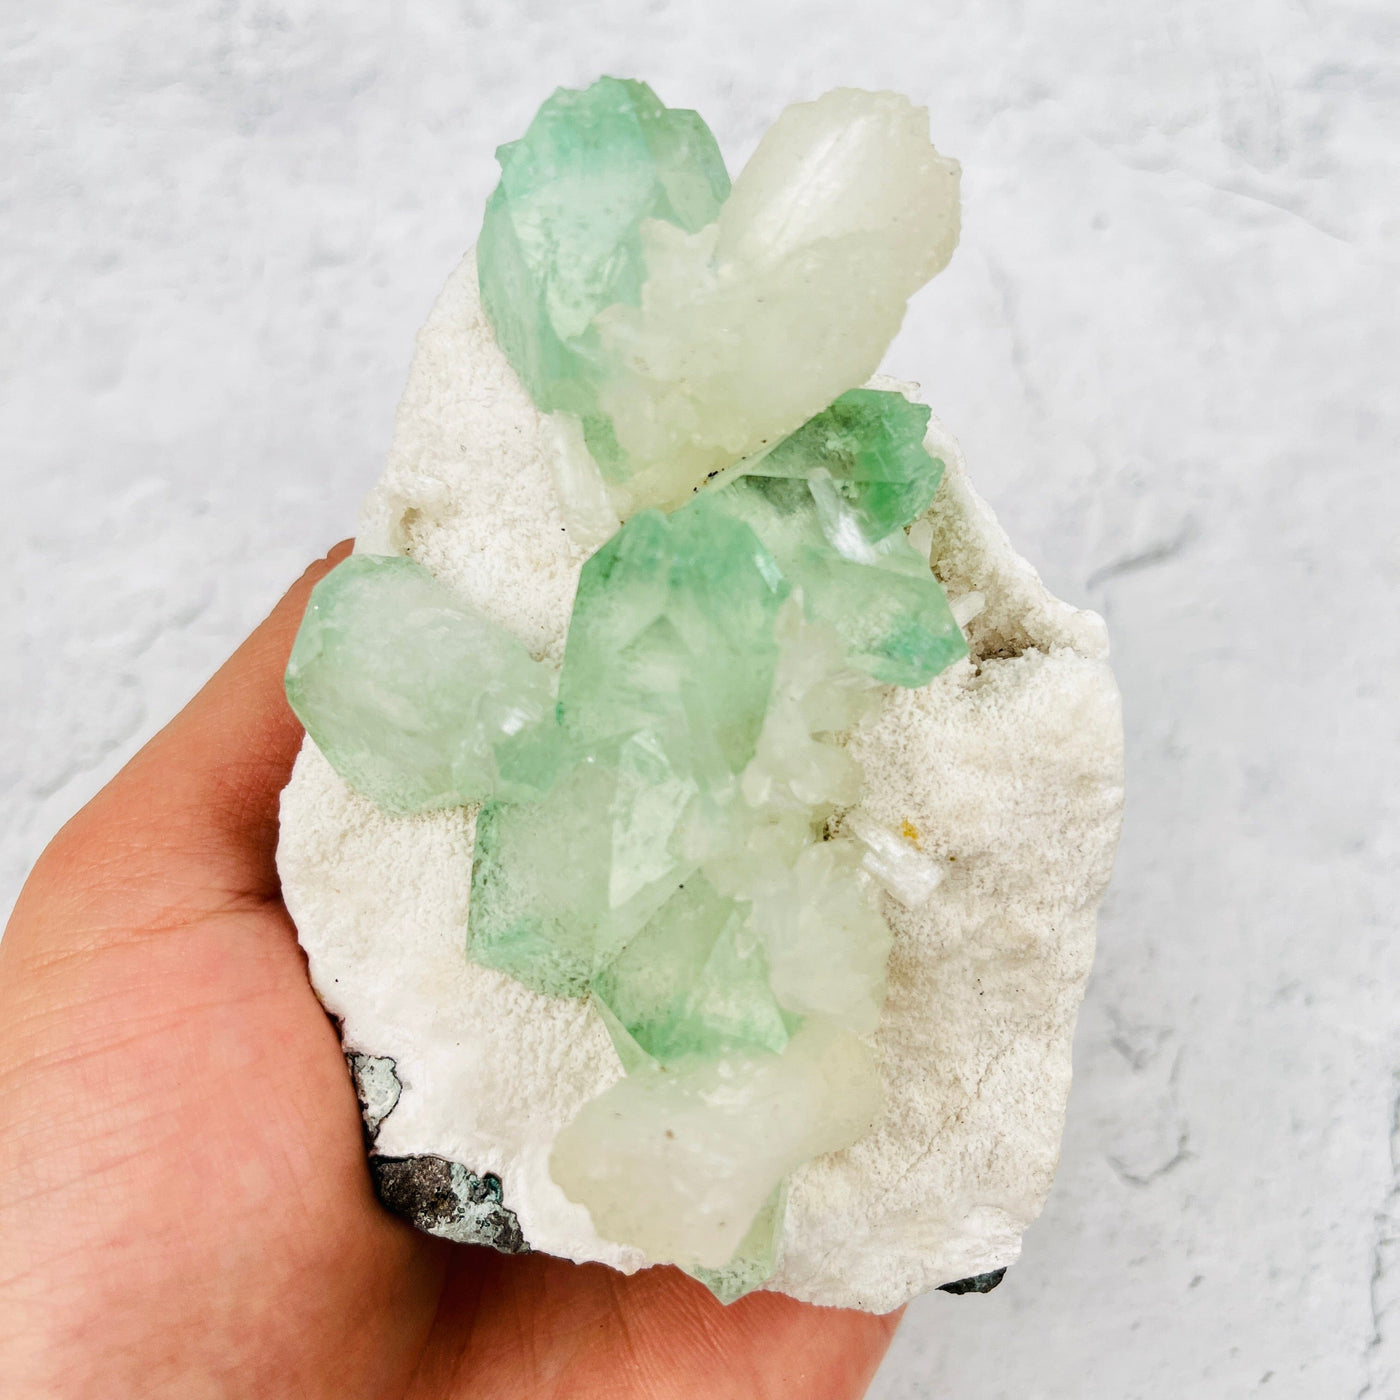 Green Apophyllite with Stilbite Crystal Clusters Zeolites - With Hand For Sizing Reference